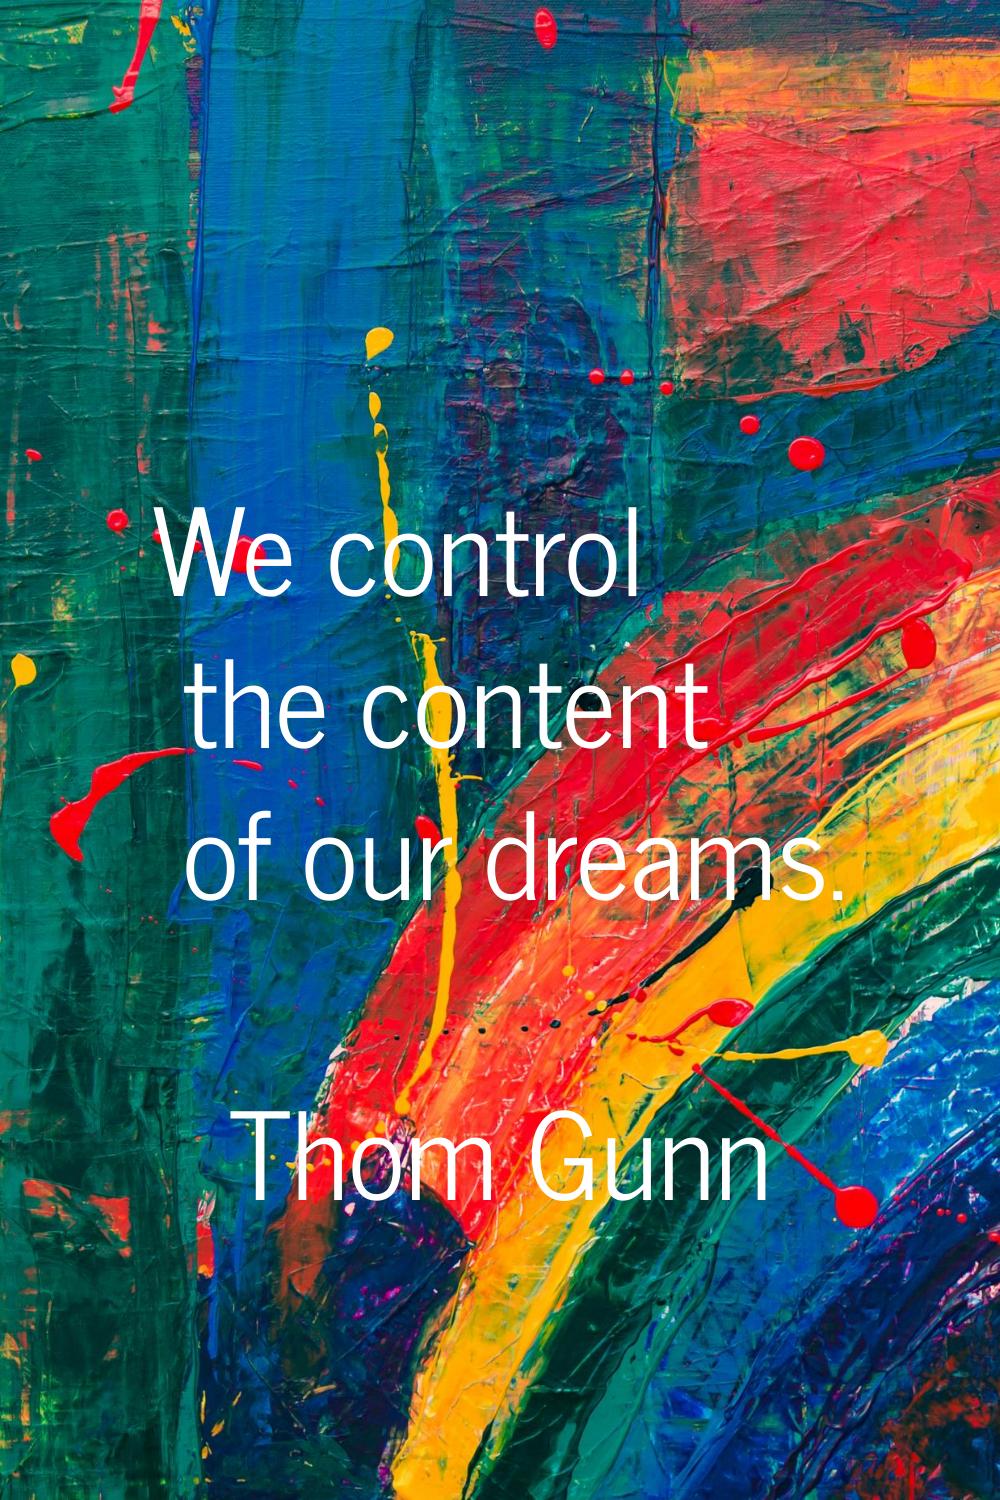 We control the content of our dreams.